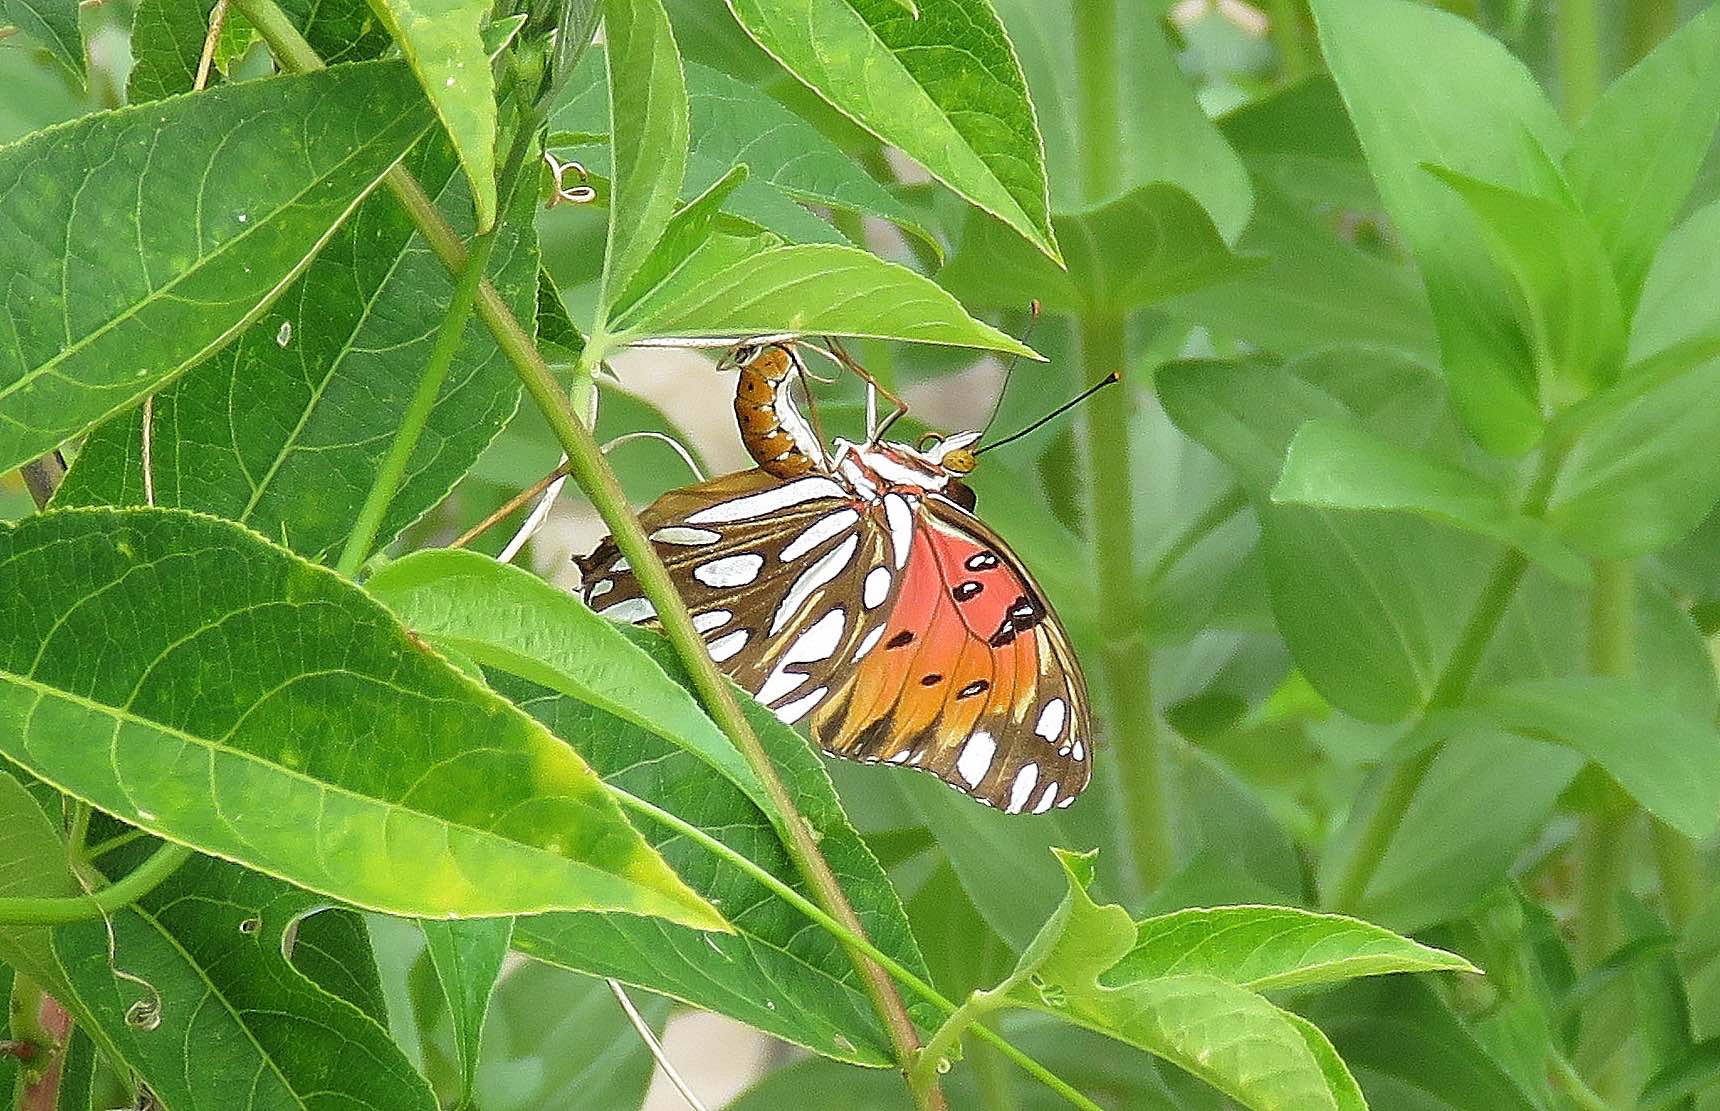 Female Gulf Fritillary Butterfly on Passion Vine laying eggs